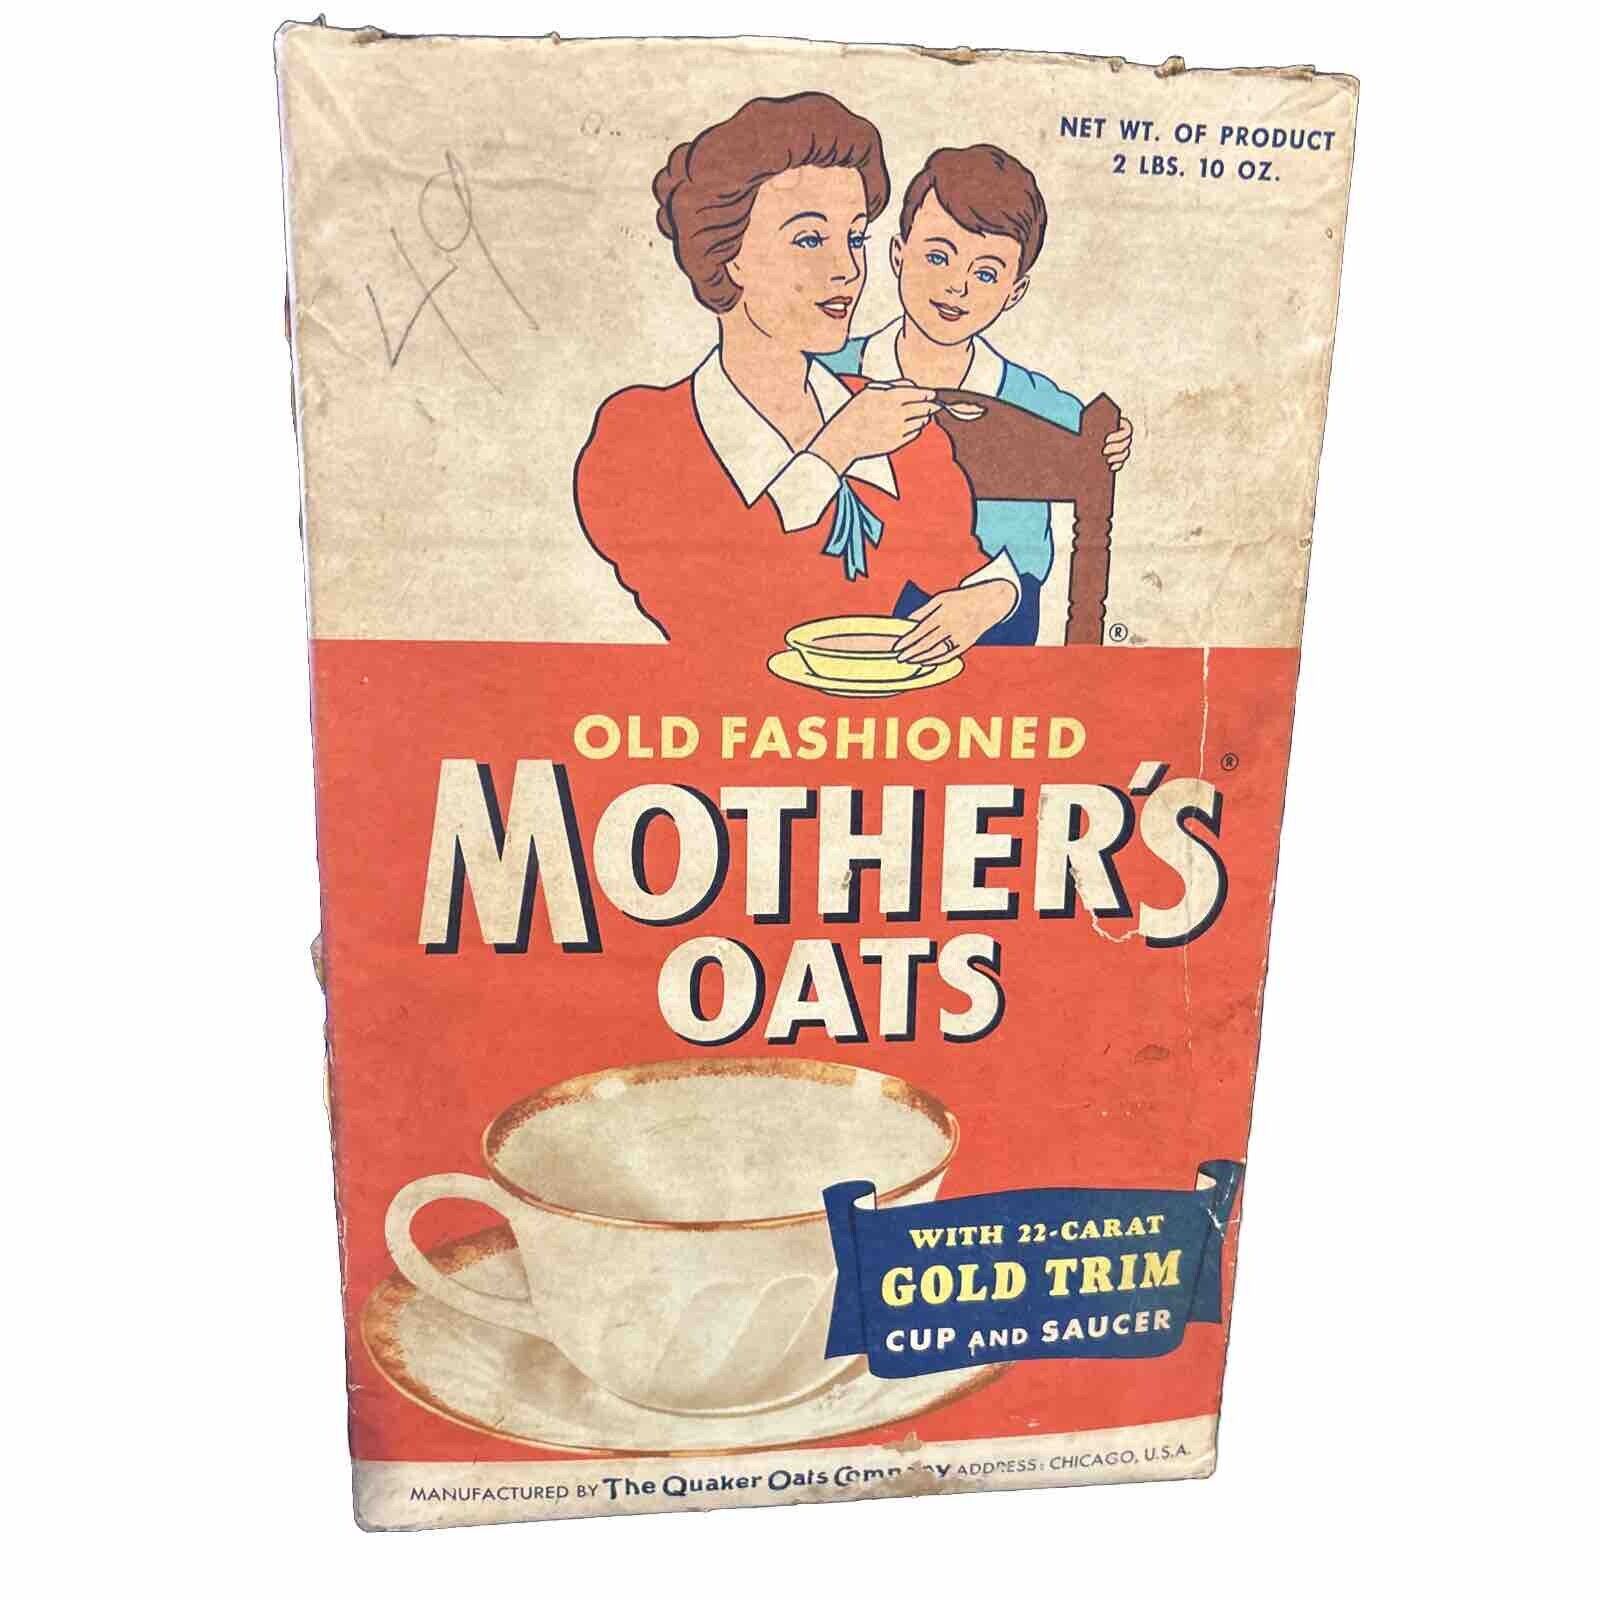 RARE Vintage Old Store Old Fashioned MOTHER'S OATS Box 2lbs 10oz Cup Saucer Prom